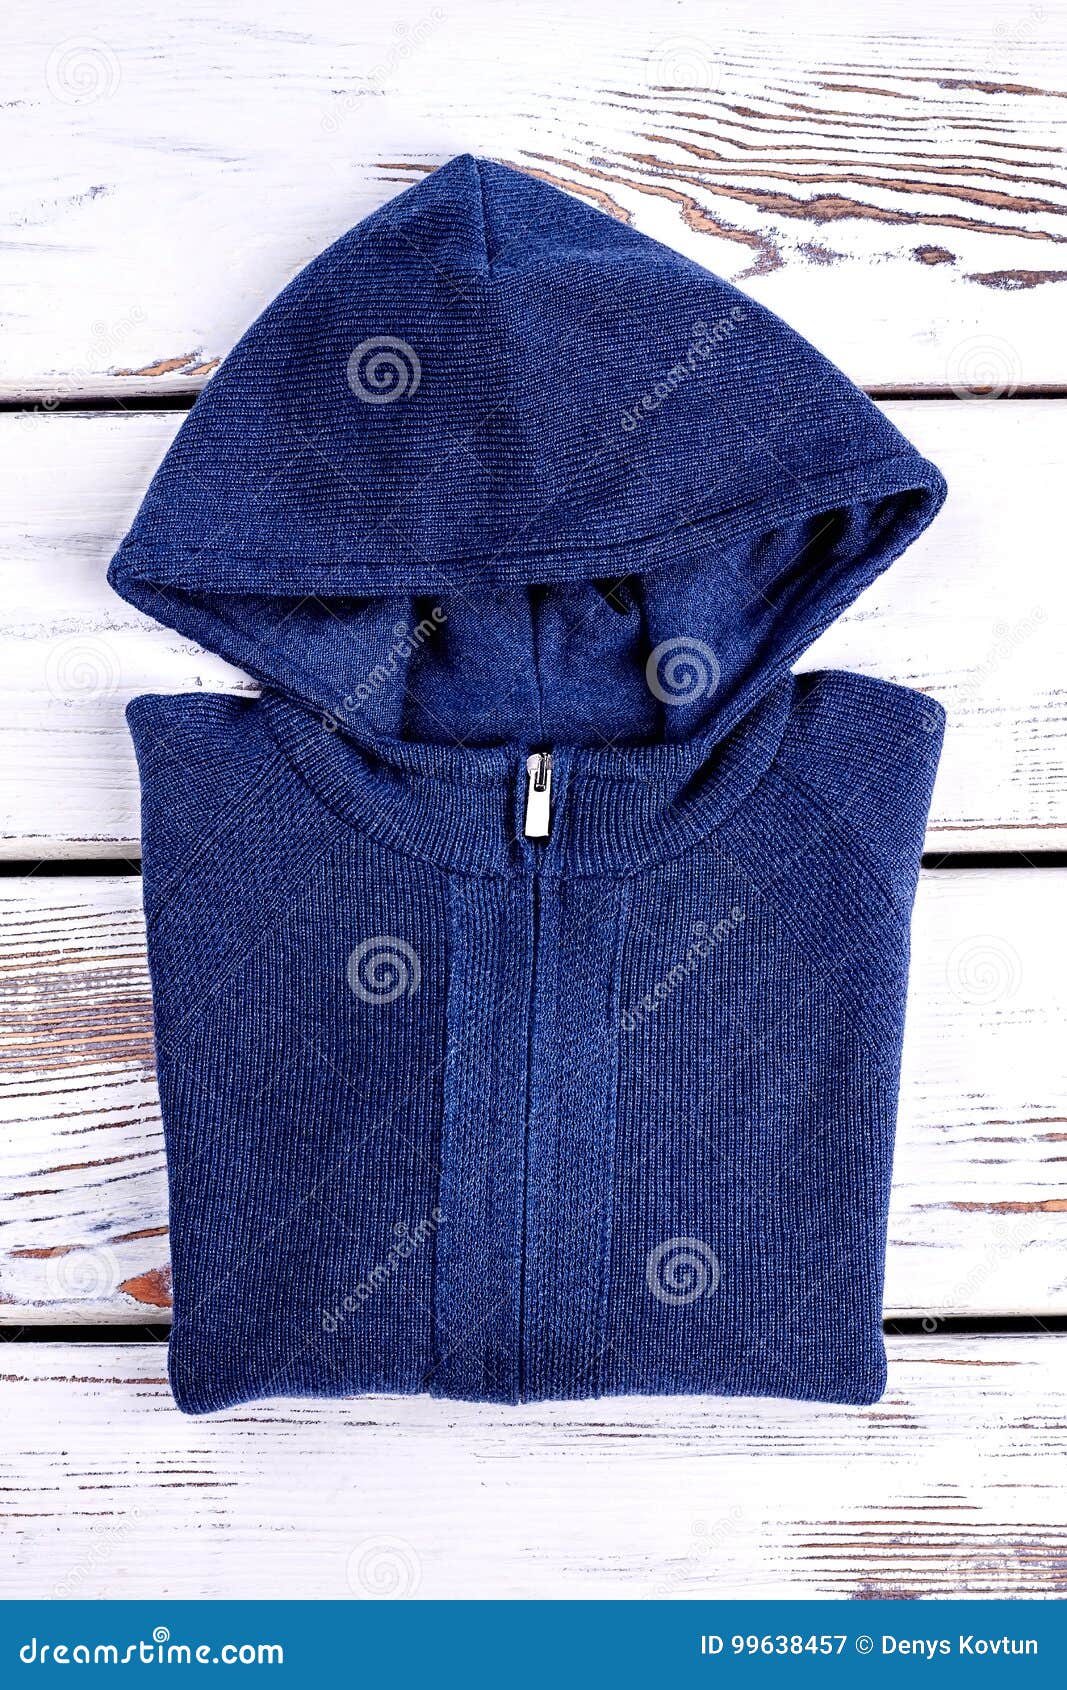 New Beautiful Knitted Hooded Cardigan. Stock Image - Image of knitted ...